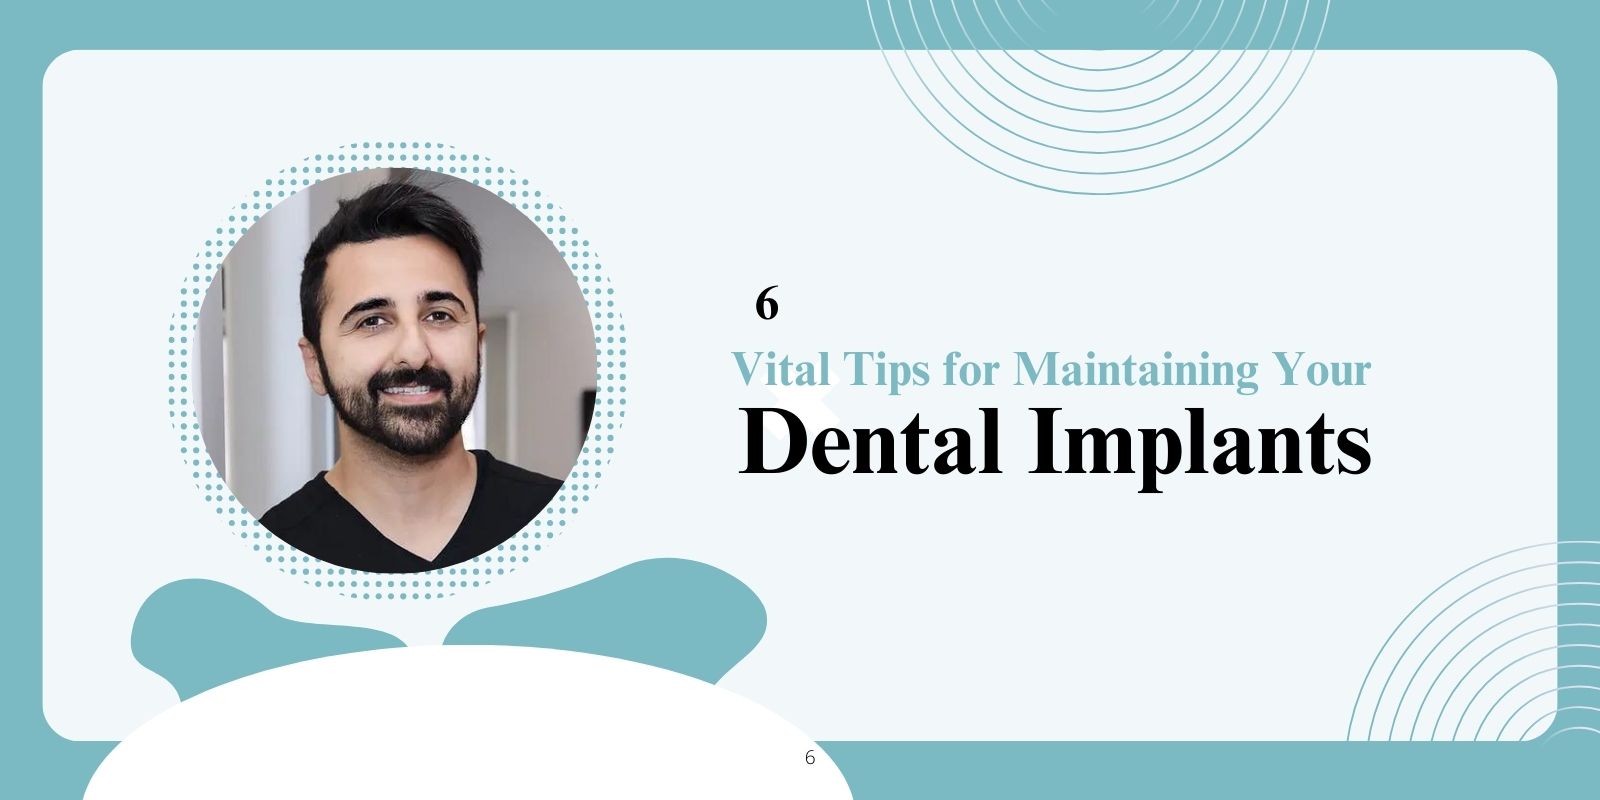 6 Vital Tips for Maintaining Your Dental Implants